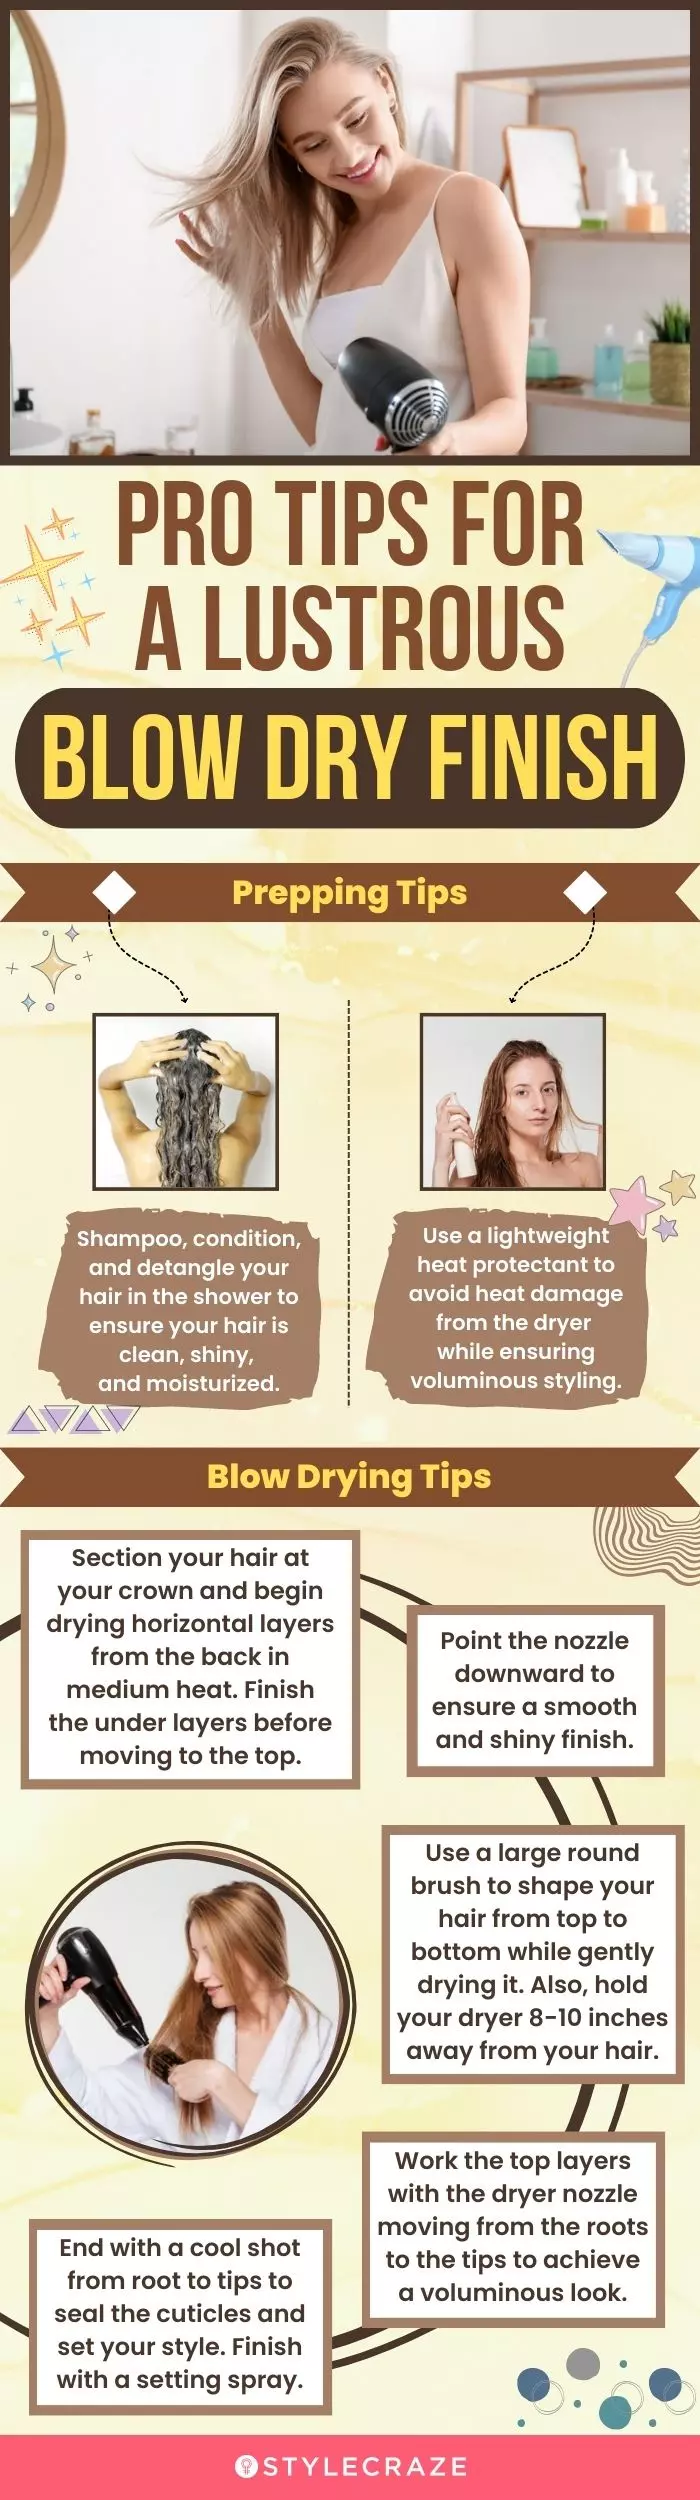 Pro Tips For A Lustrous Blow Dry Finish (infographic)